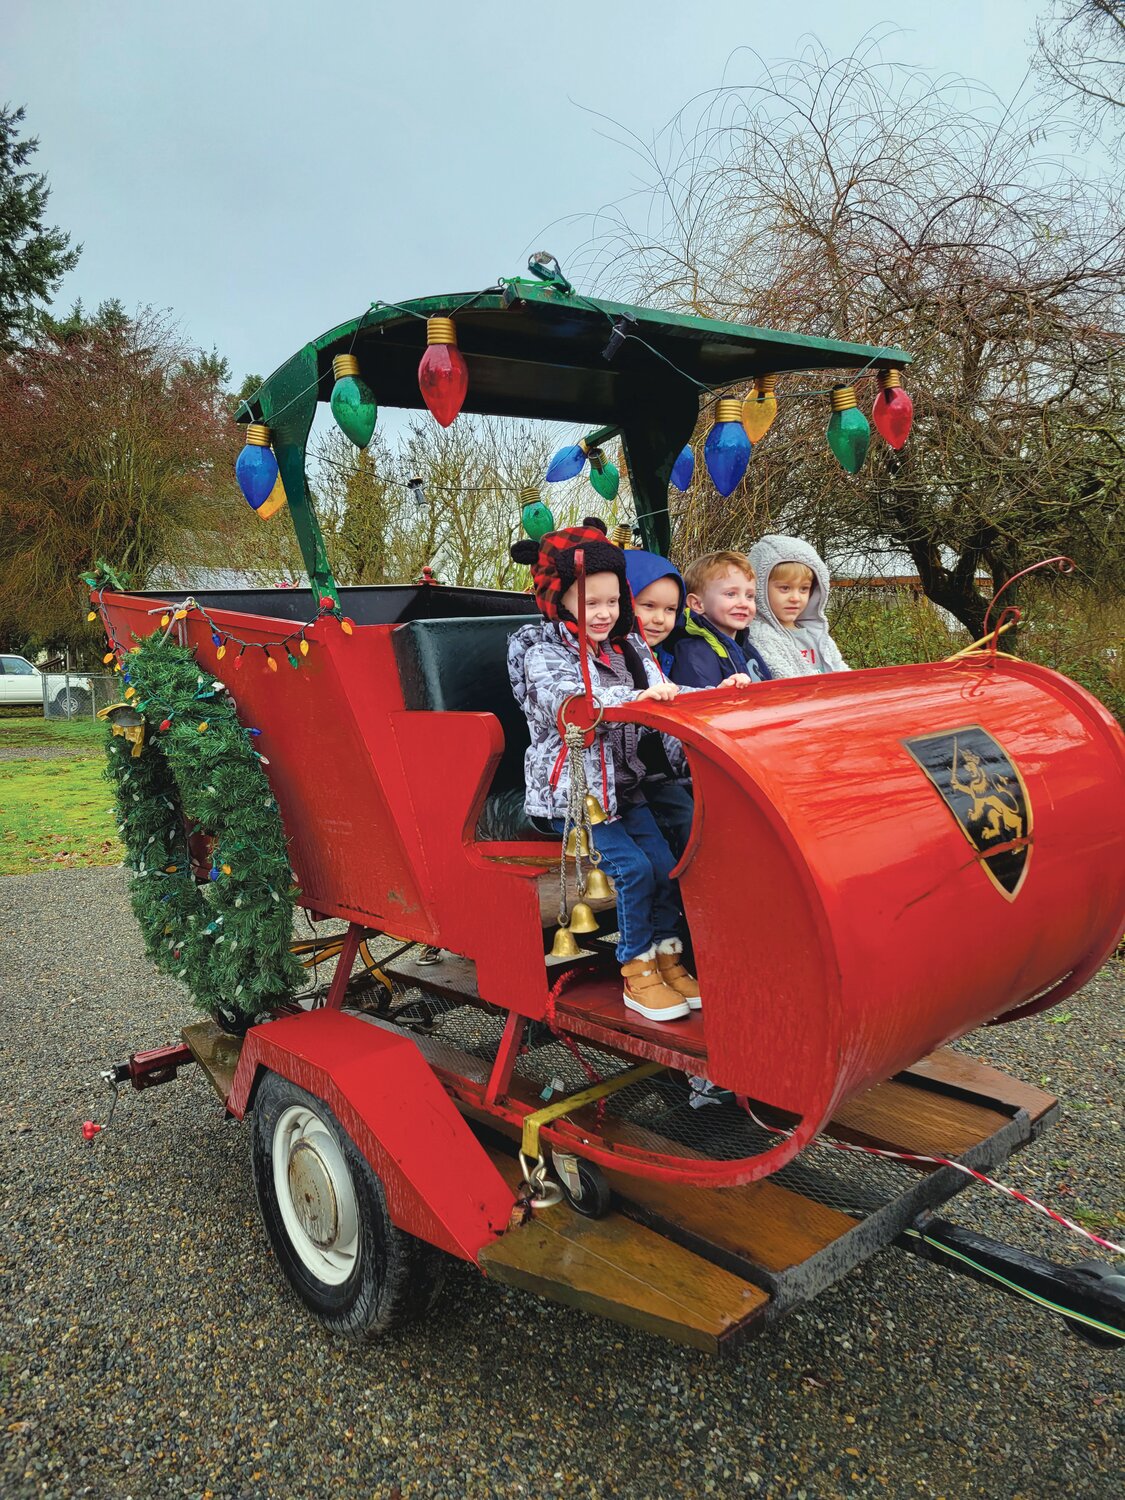 Kids sit in Harry Miller's Santa sleigh, part of his gig as the Cougar Mountain Santa.